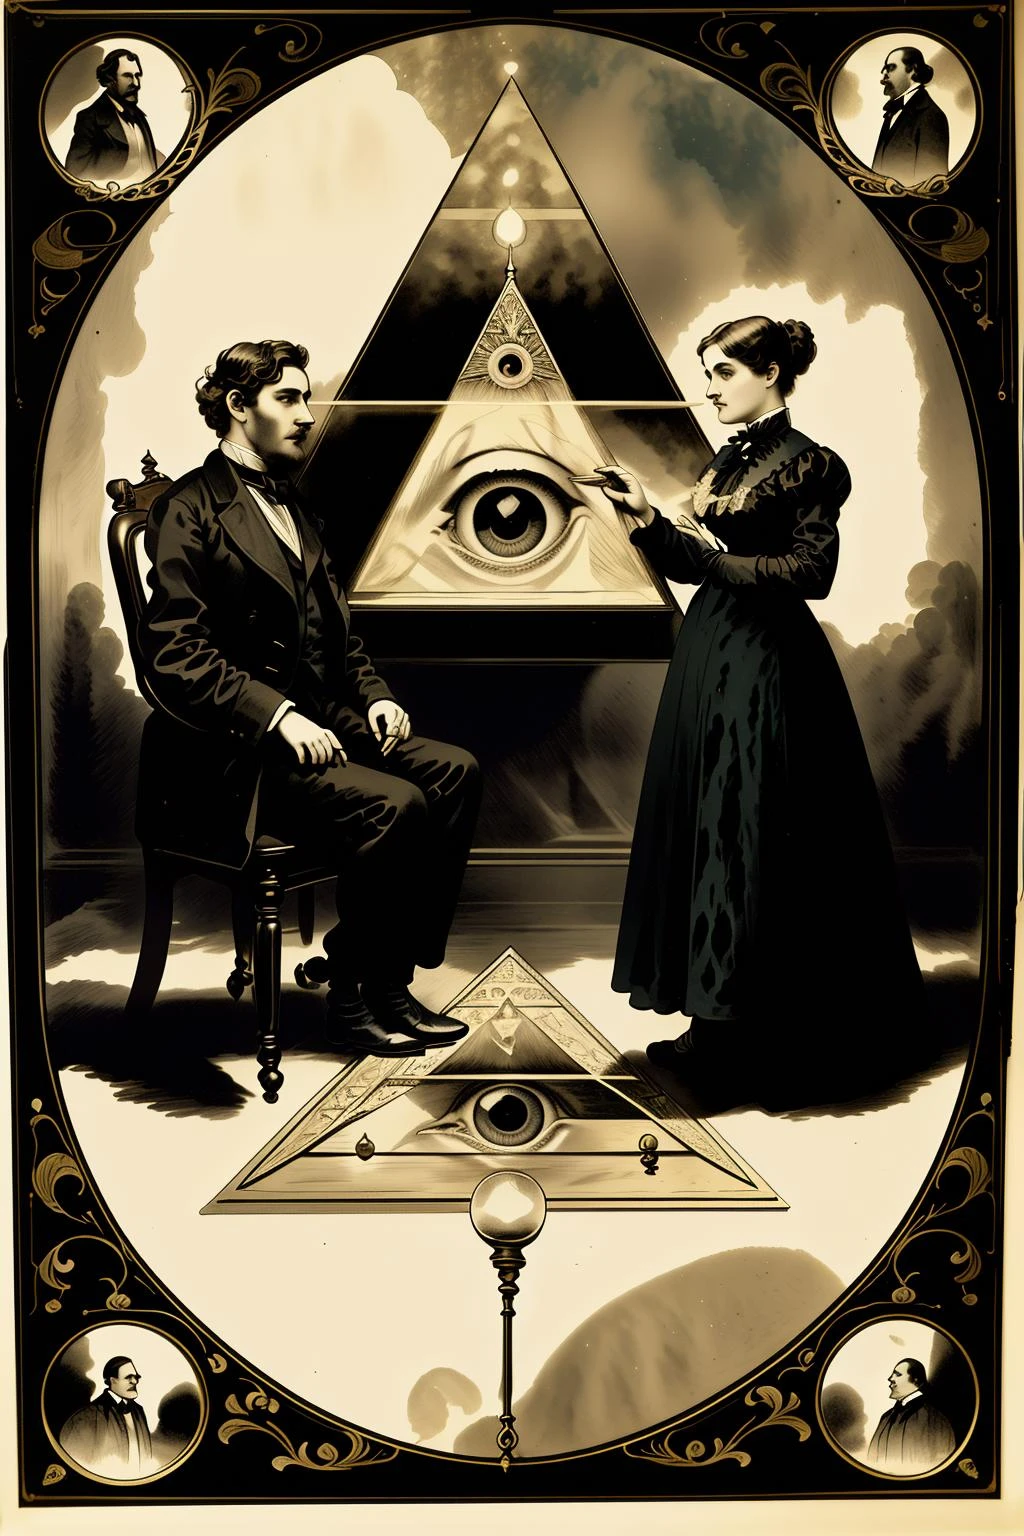 a victorian  poster advertising a  a painting of two people sitting on a rug in front of a pyramid with an eye in the center of the image and a third person standing on the floor , 1800, Charles McAuley, set in 1860, a silk screen, american barbizon school,  victorian_esoteric , (( victorian style graphic ))